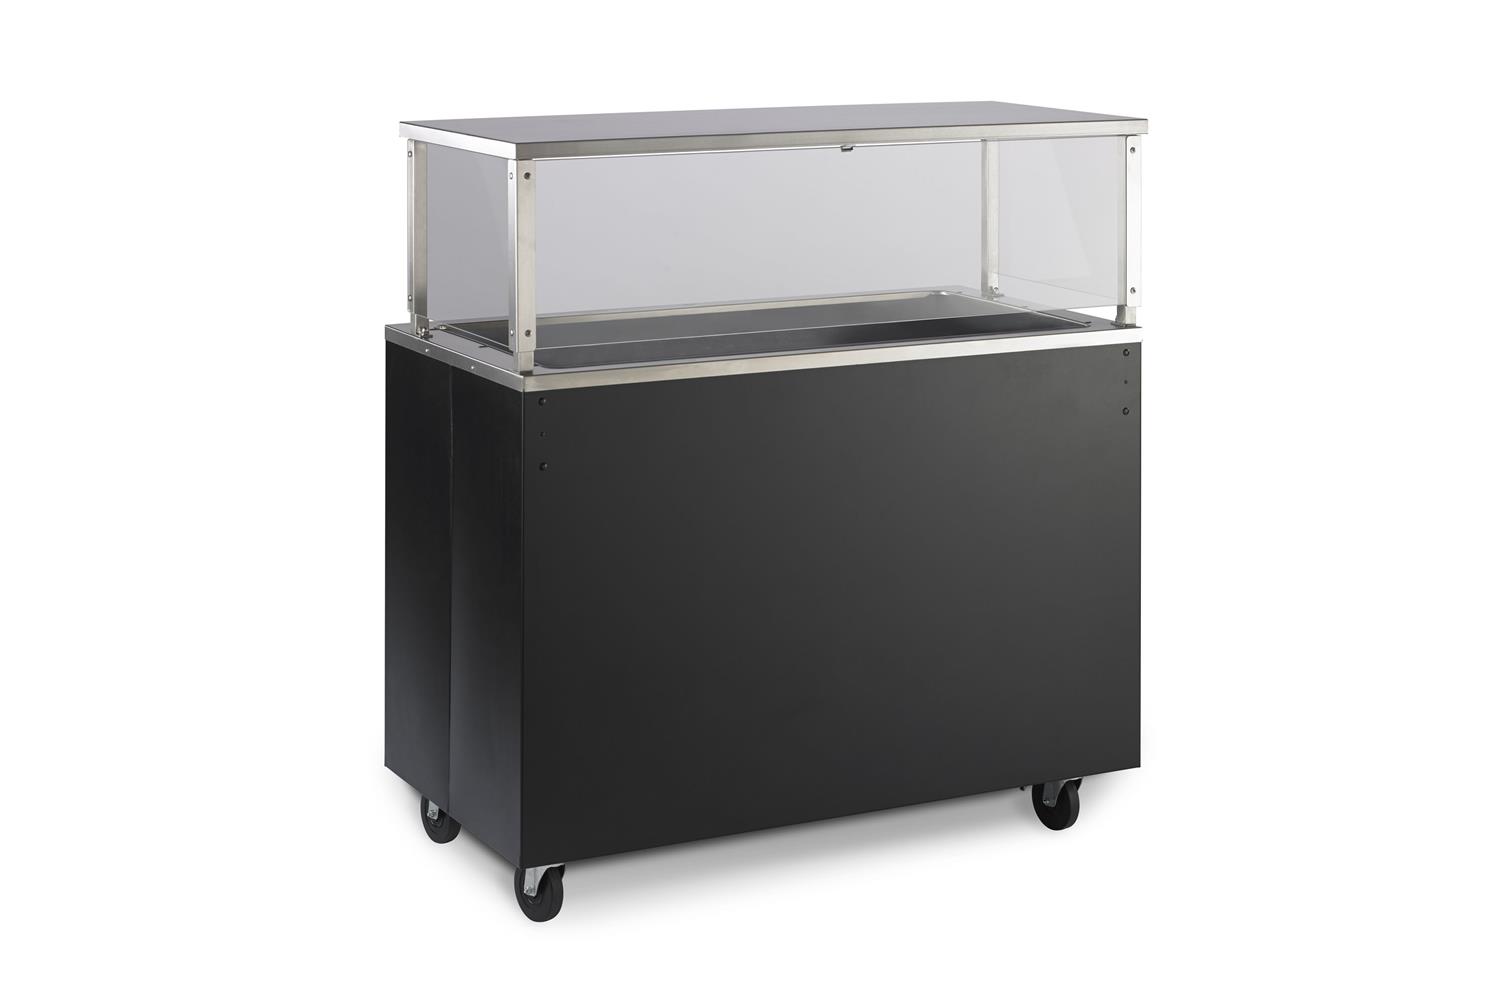 Vollrath 39775 Affordable Portable Cold Food Station - Cafeteria